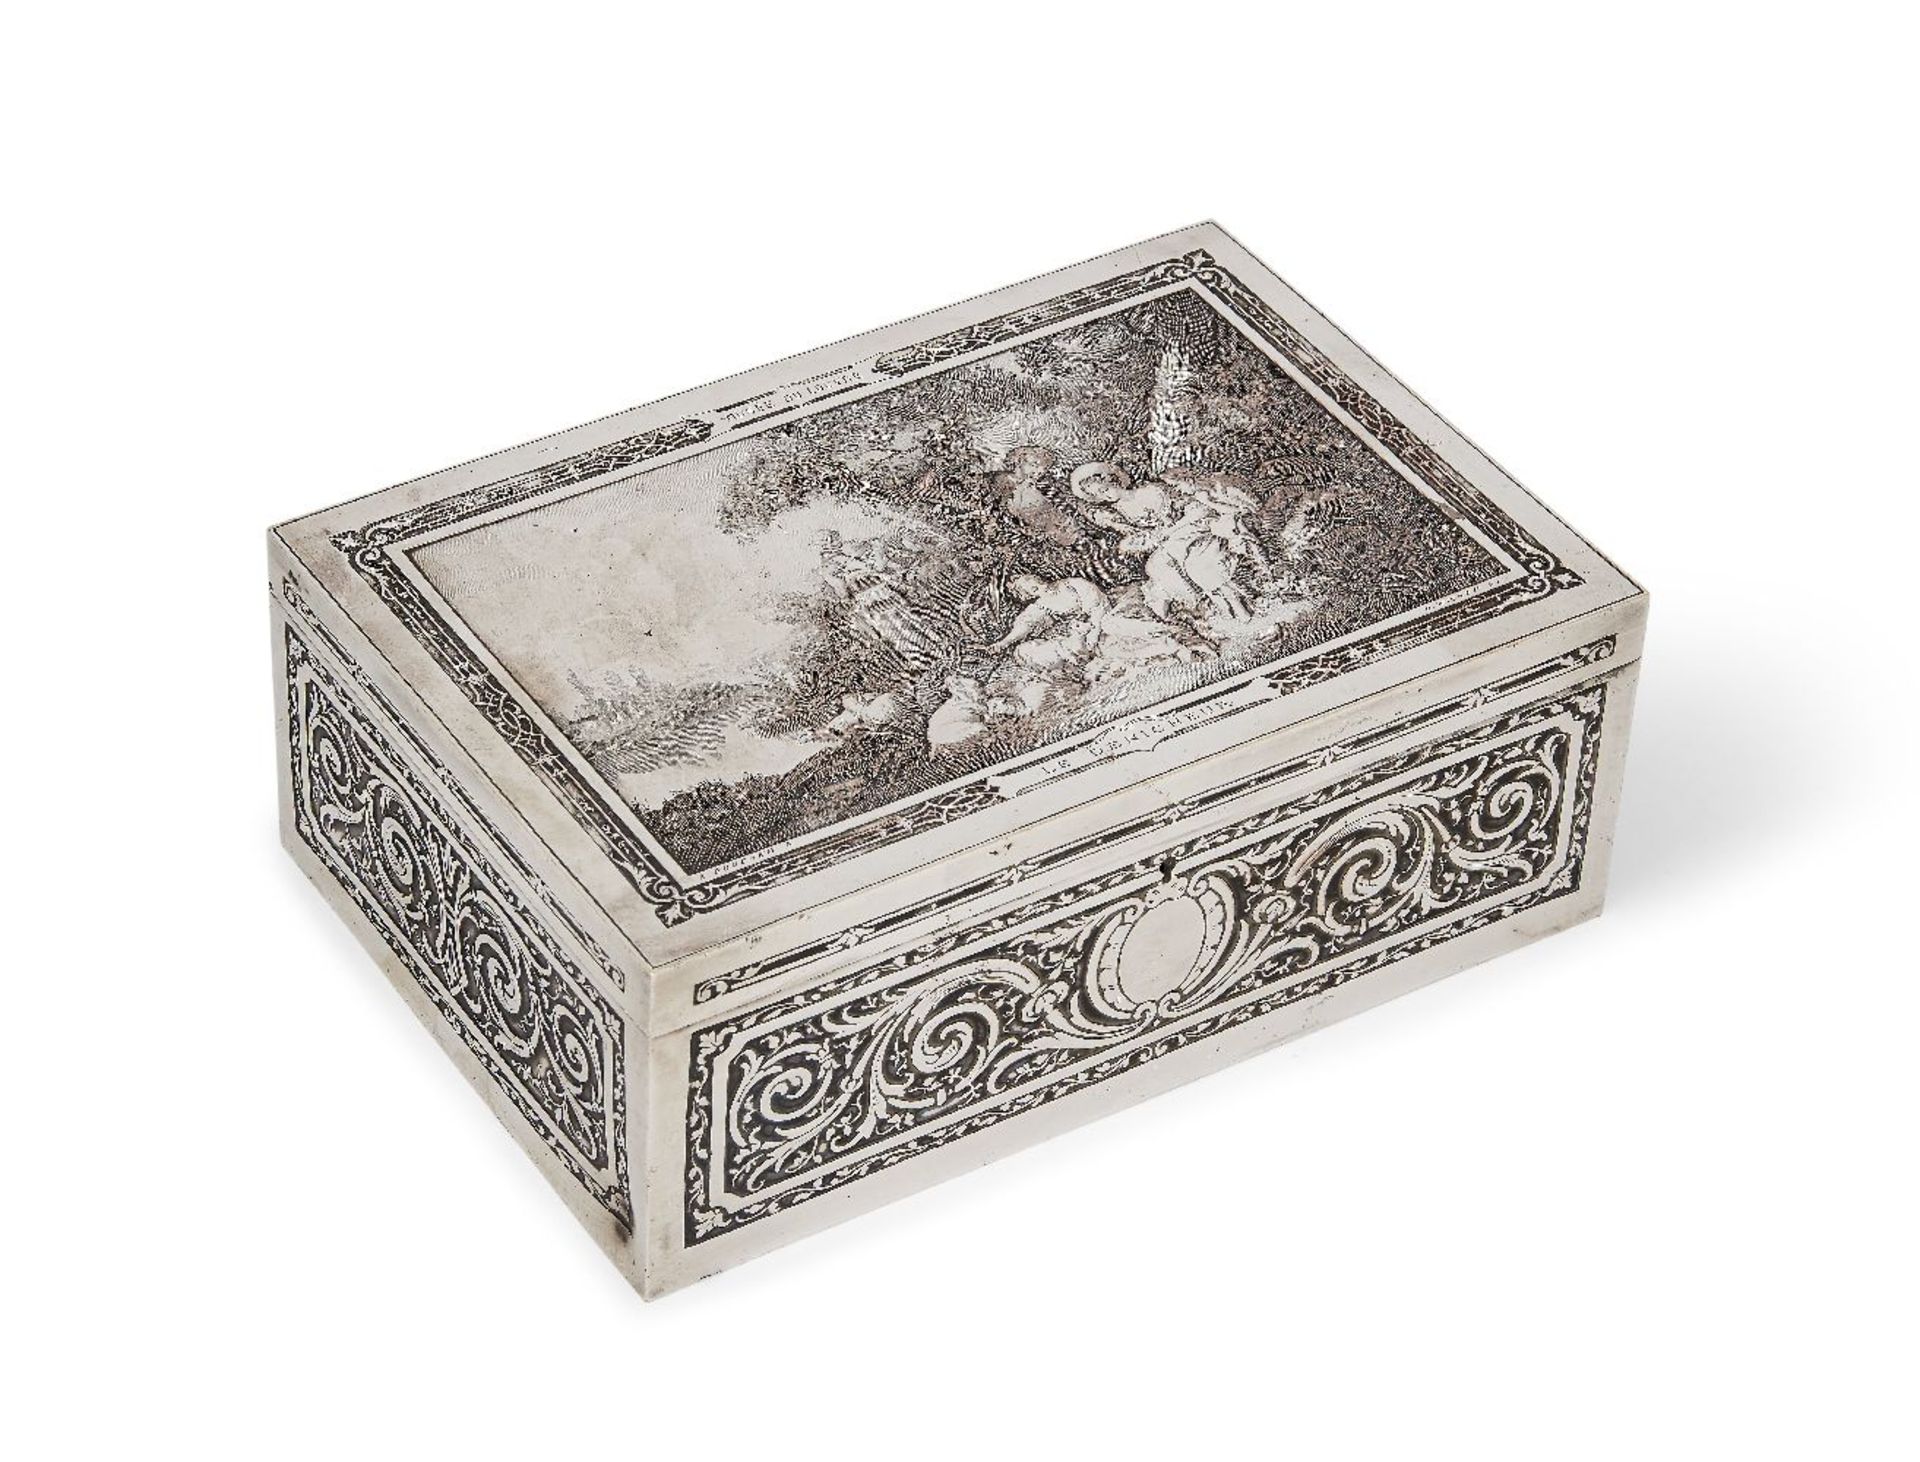 A silver plated 'Le Denicheur' design jewellery box, c.1900, the rectangular box engraved with a